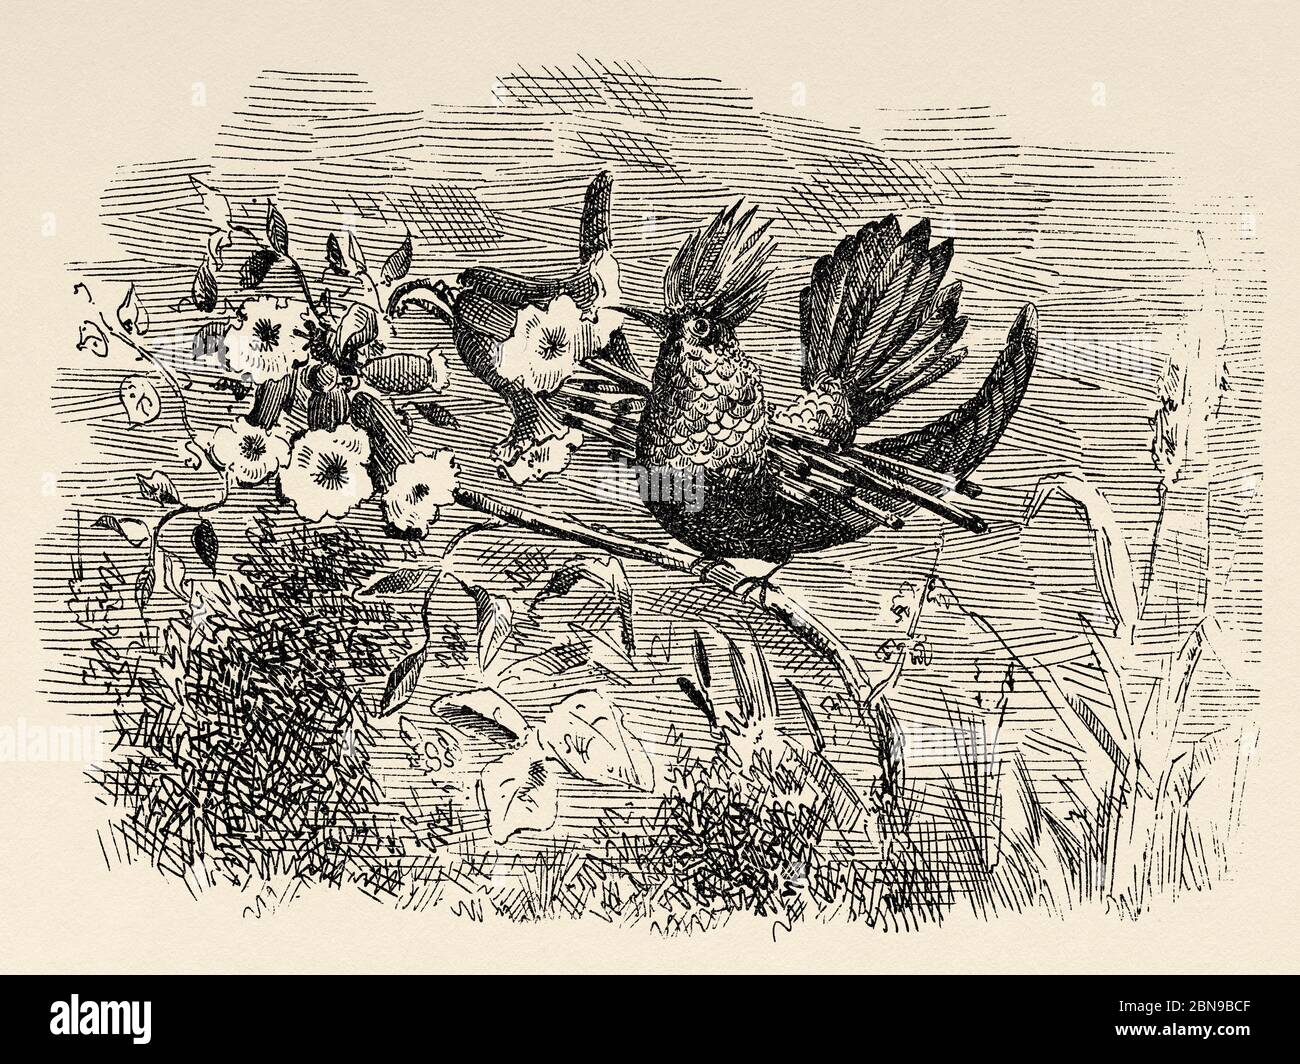 The ornate coqueta or cinnamon fan coqueta (Lophornis ornatus) is a species of apodiform bird of the hummingbird family that lives in northern South America. Old engraved animal illustration 19th century Stock Photo